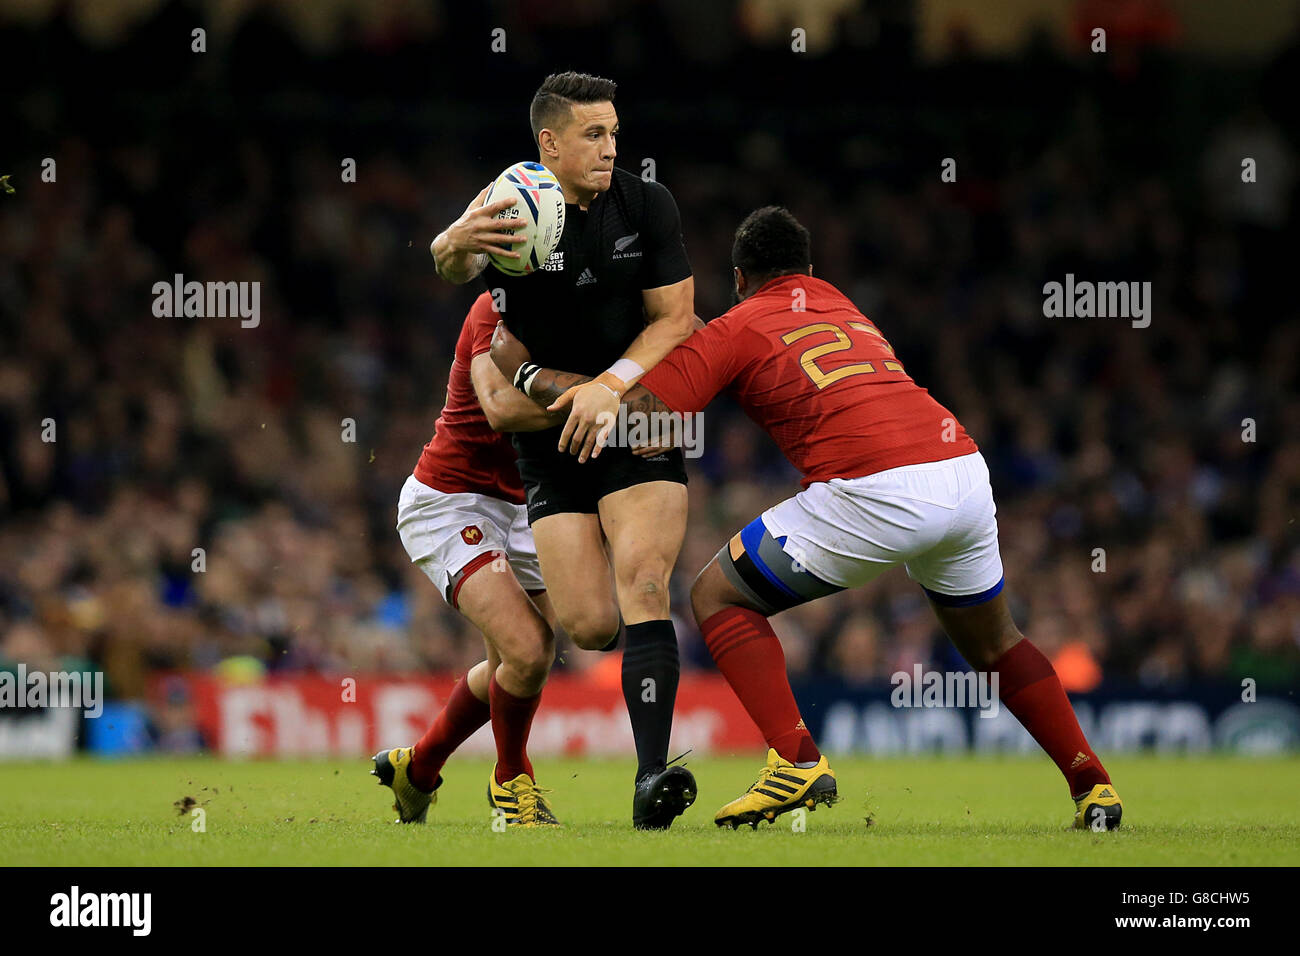 Rugby Union - Rugby World Cup 2015 - Quarter Final - New Zealand v France - Millennium Stadium Stock Photo